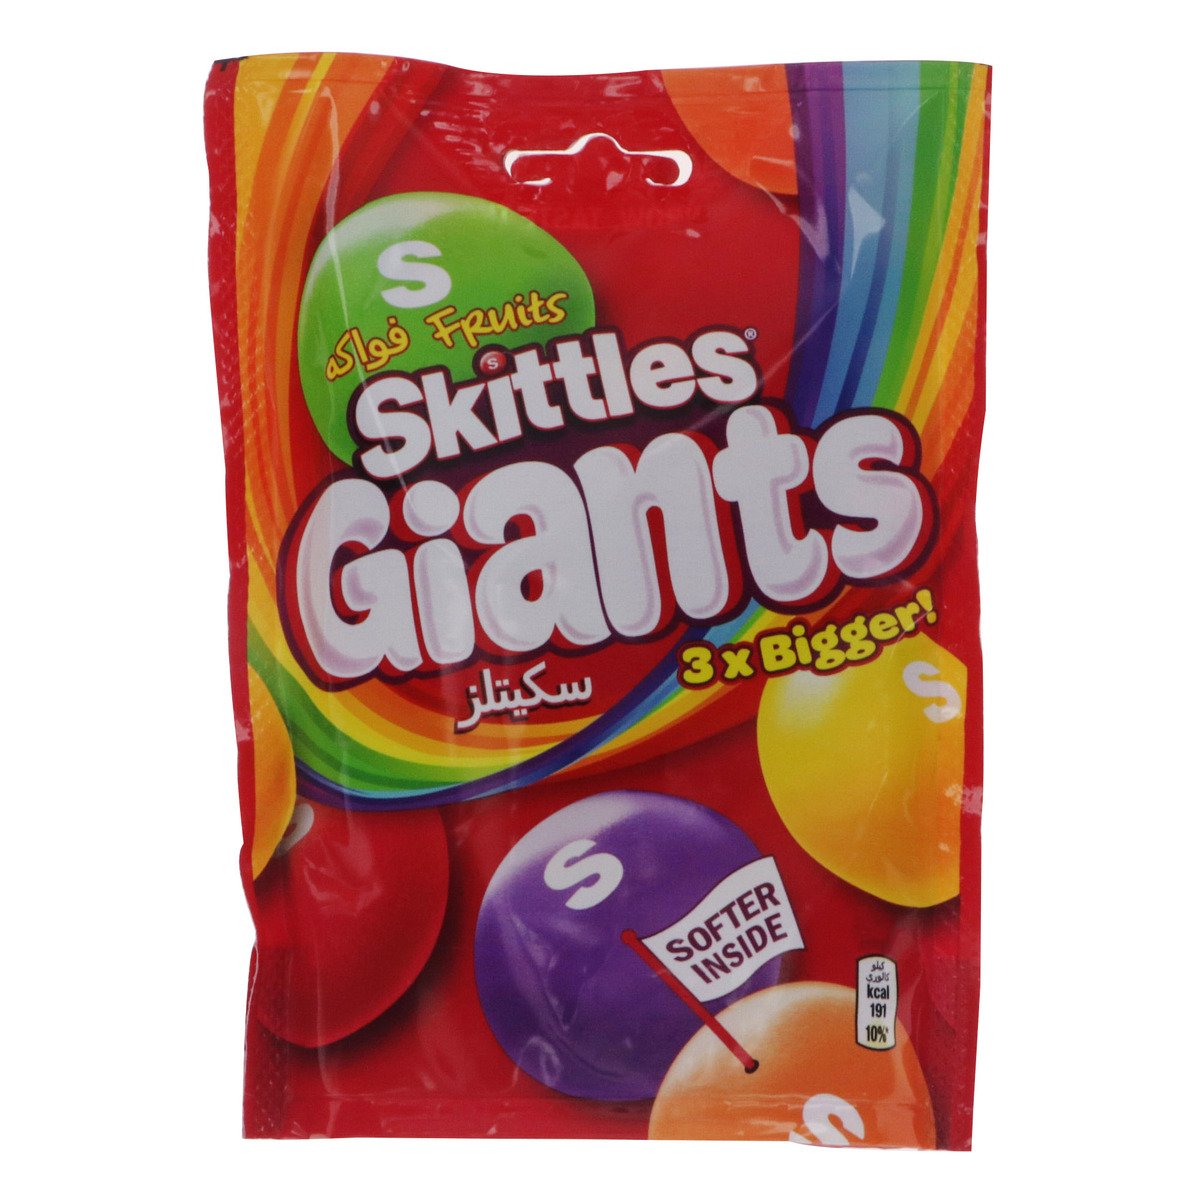 Skittles Green Giants Sweets Flavour Original Skittles Choose Your